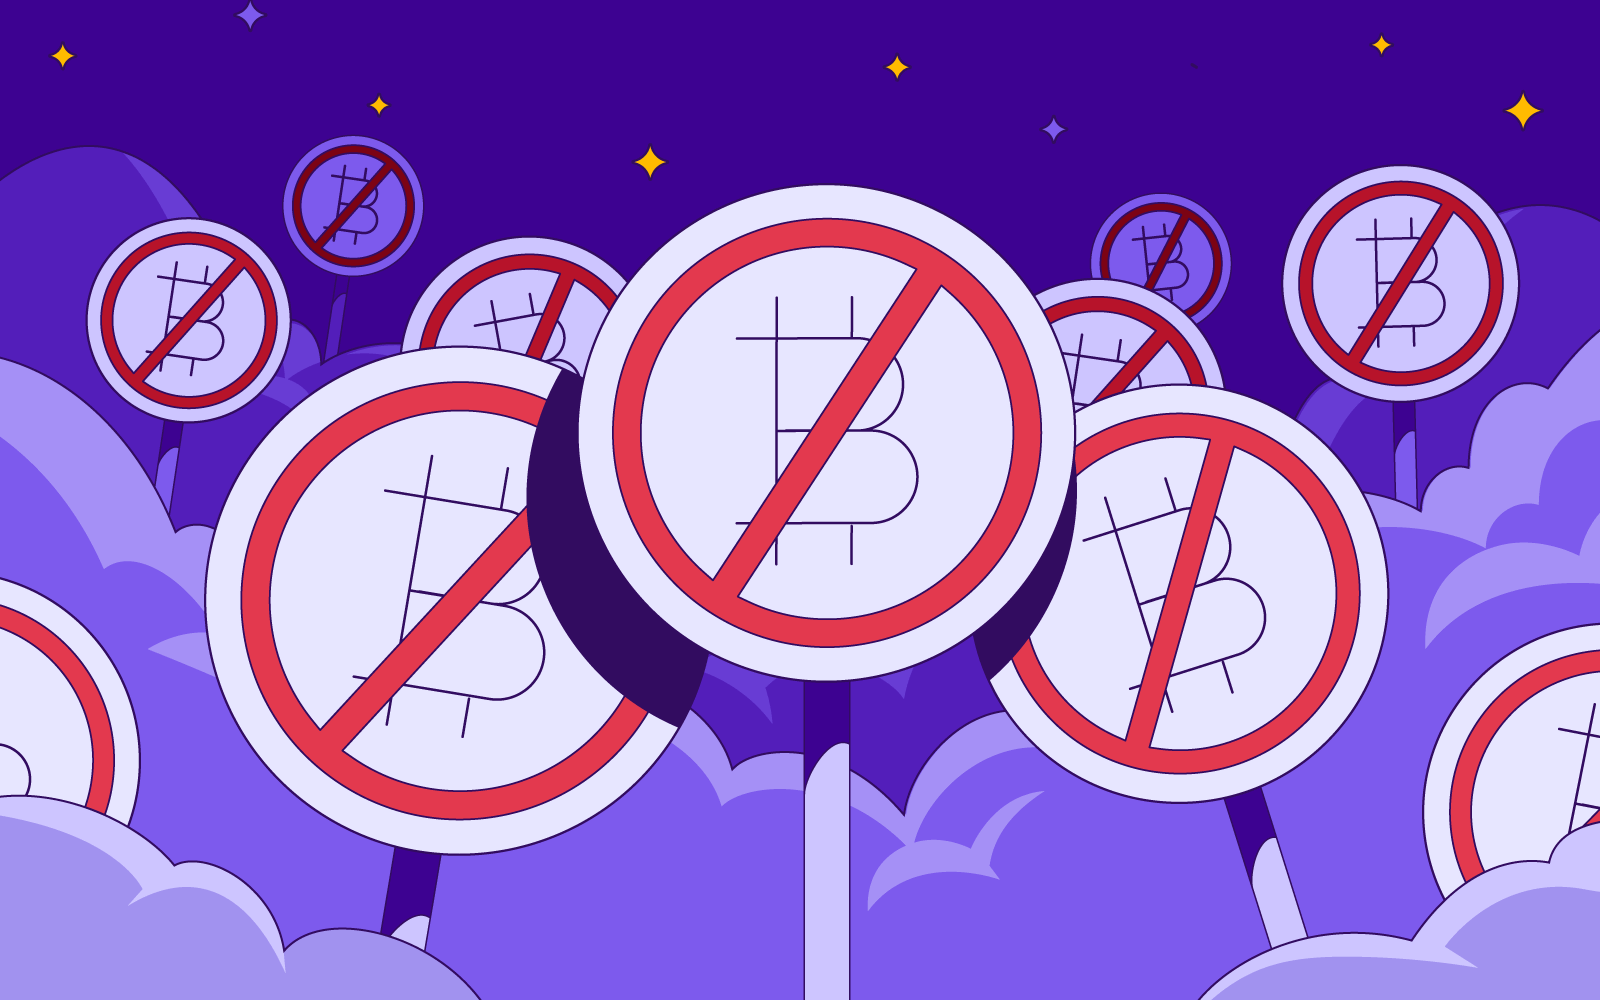 List of countries where Bitcoin is banned